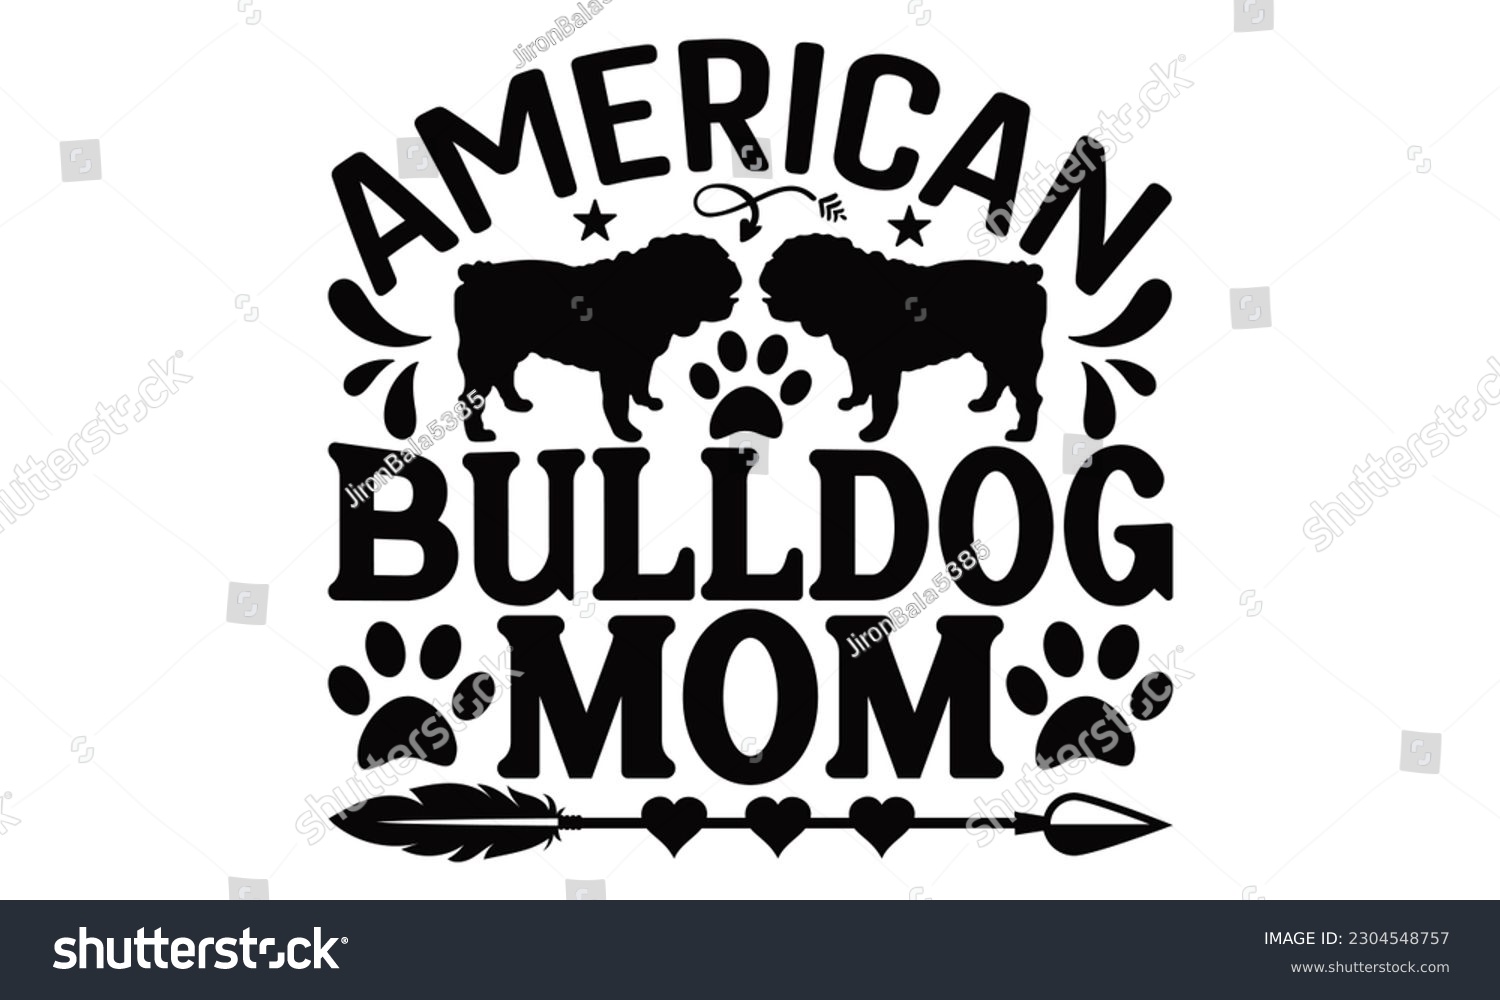 SVG of American Bulldog Mom - Bulldog SVG Design, Calligraphy graphic design, this illustration can be used as a print on t-shirts, bags, stationary or as a poster.
 svg